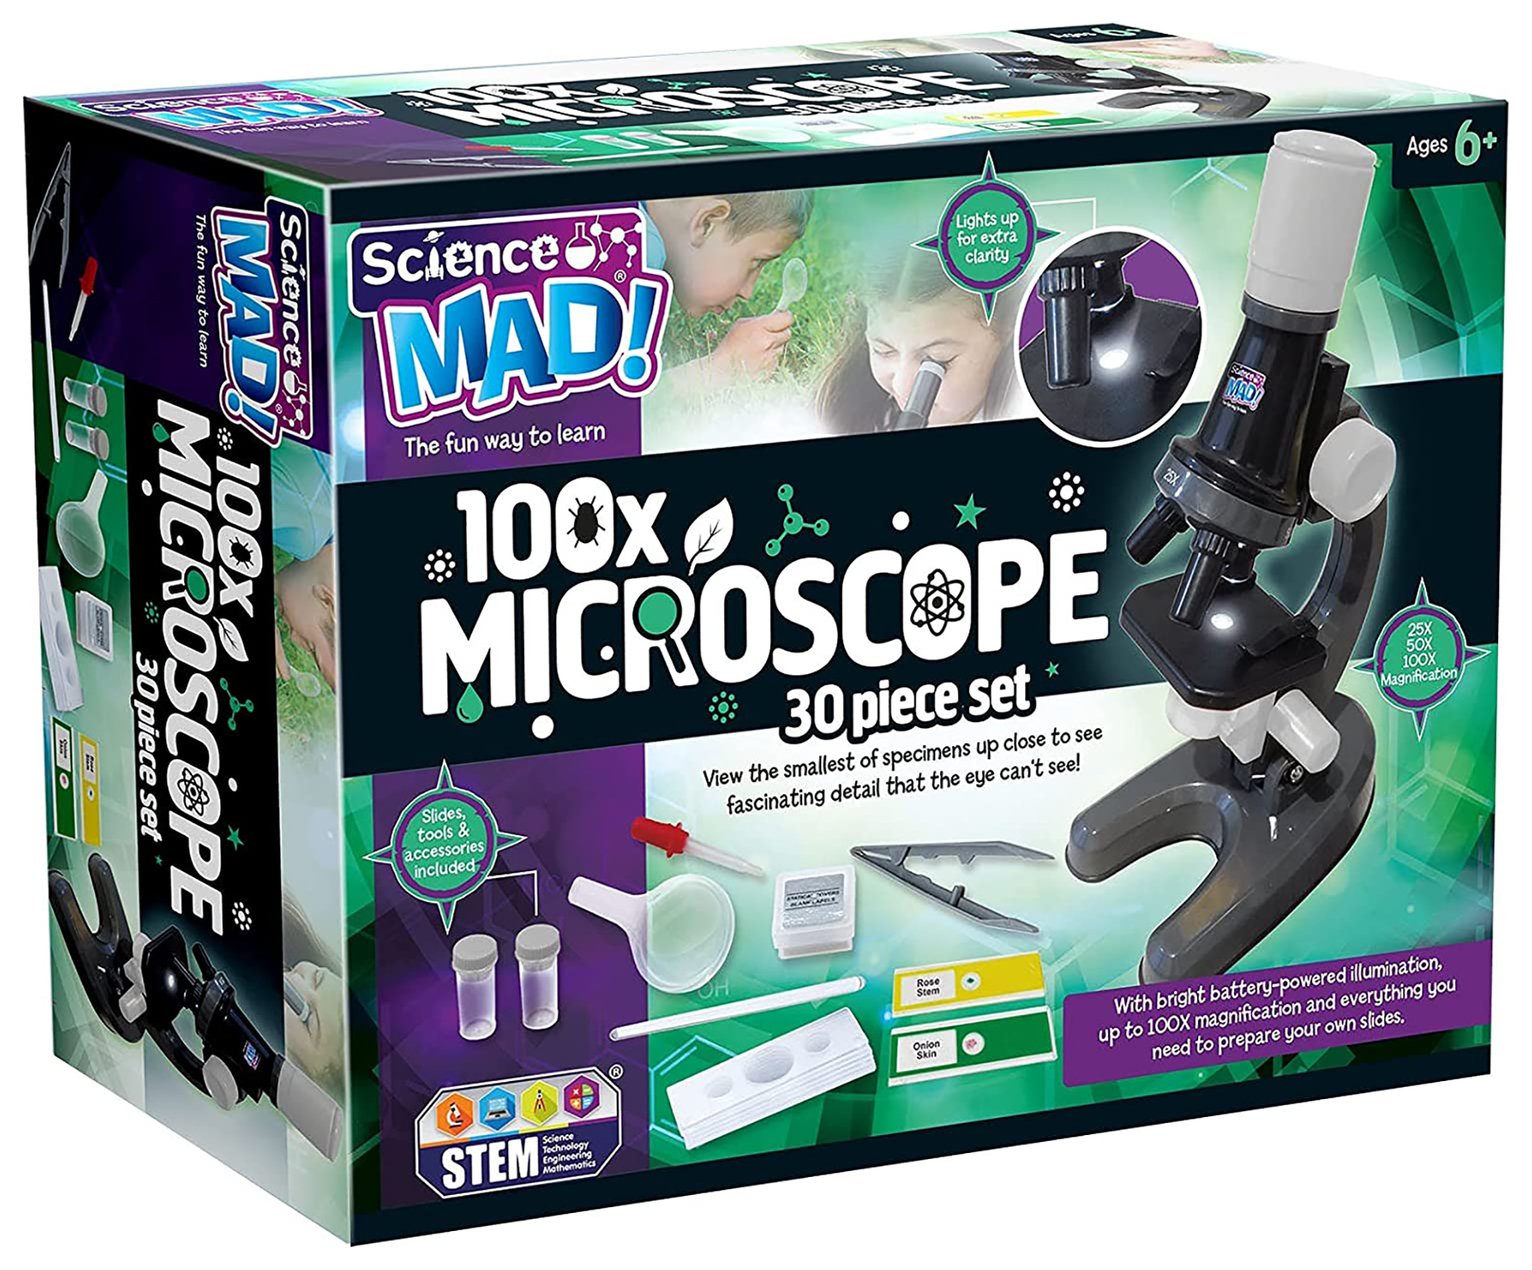 Science Mad Microscope